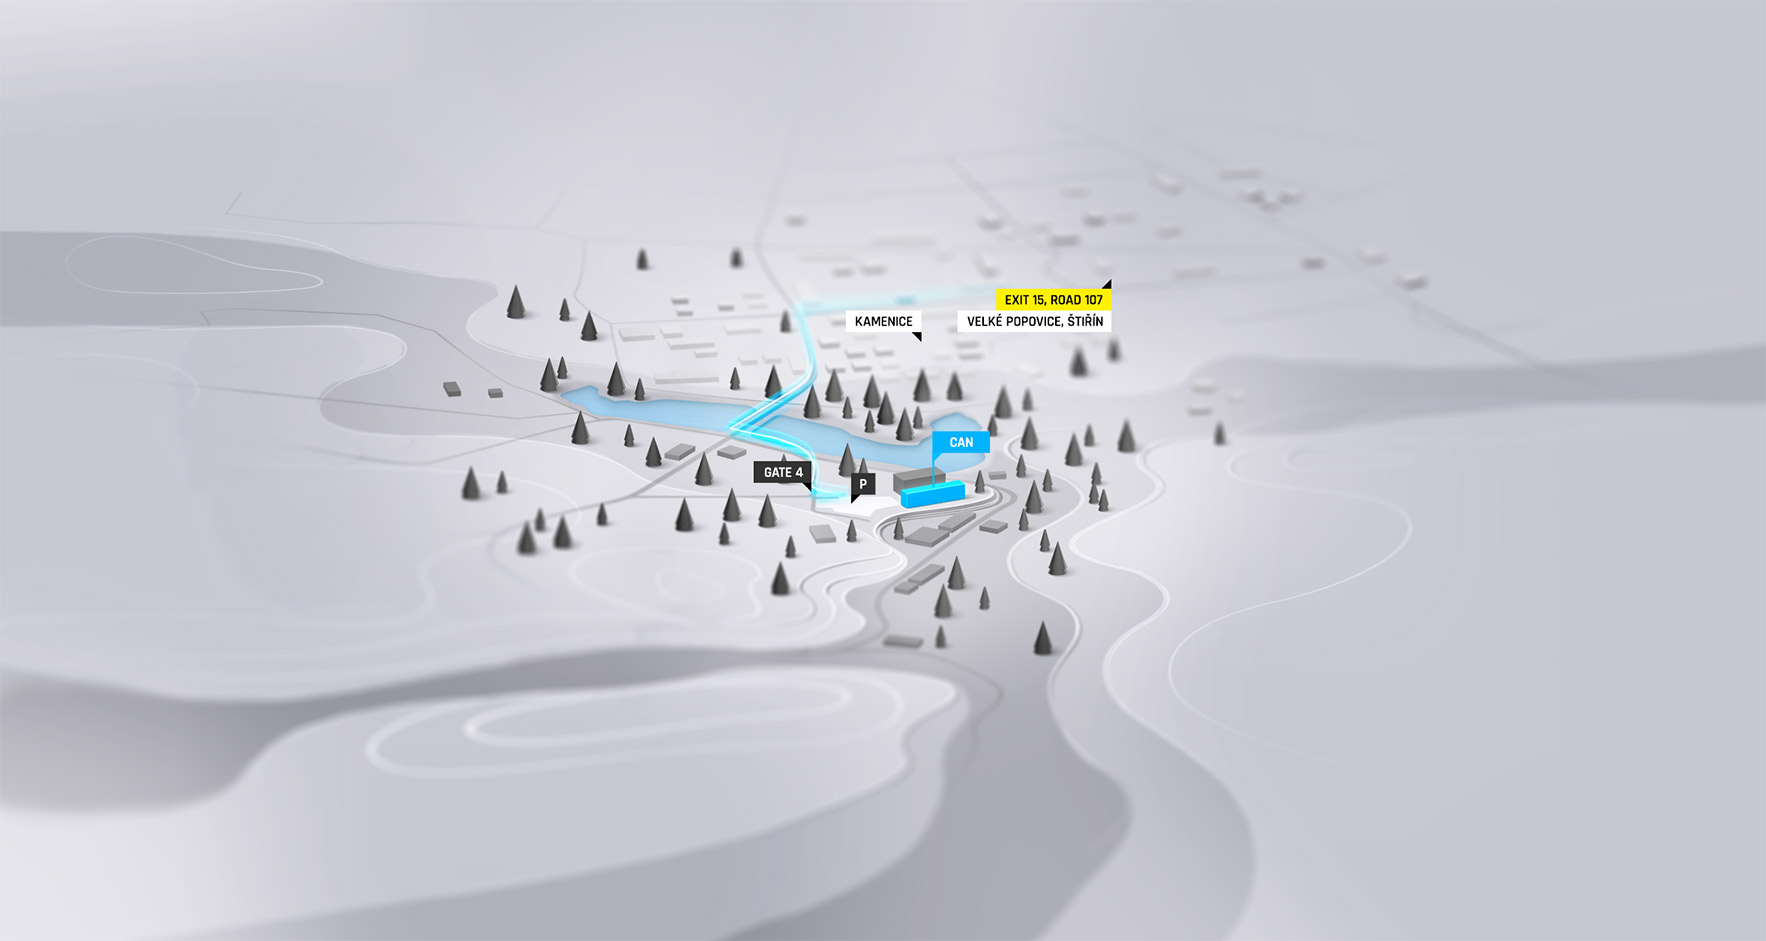 Visual map of CAN Superconductors Headquarter in Kamenice city